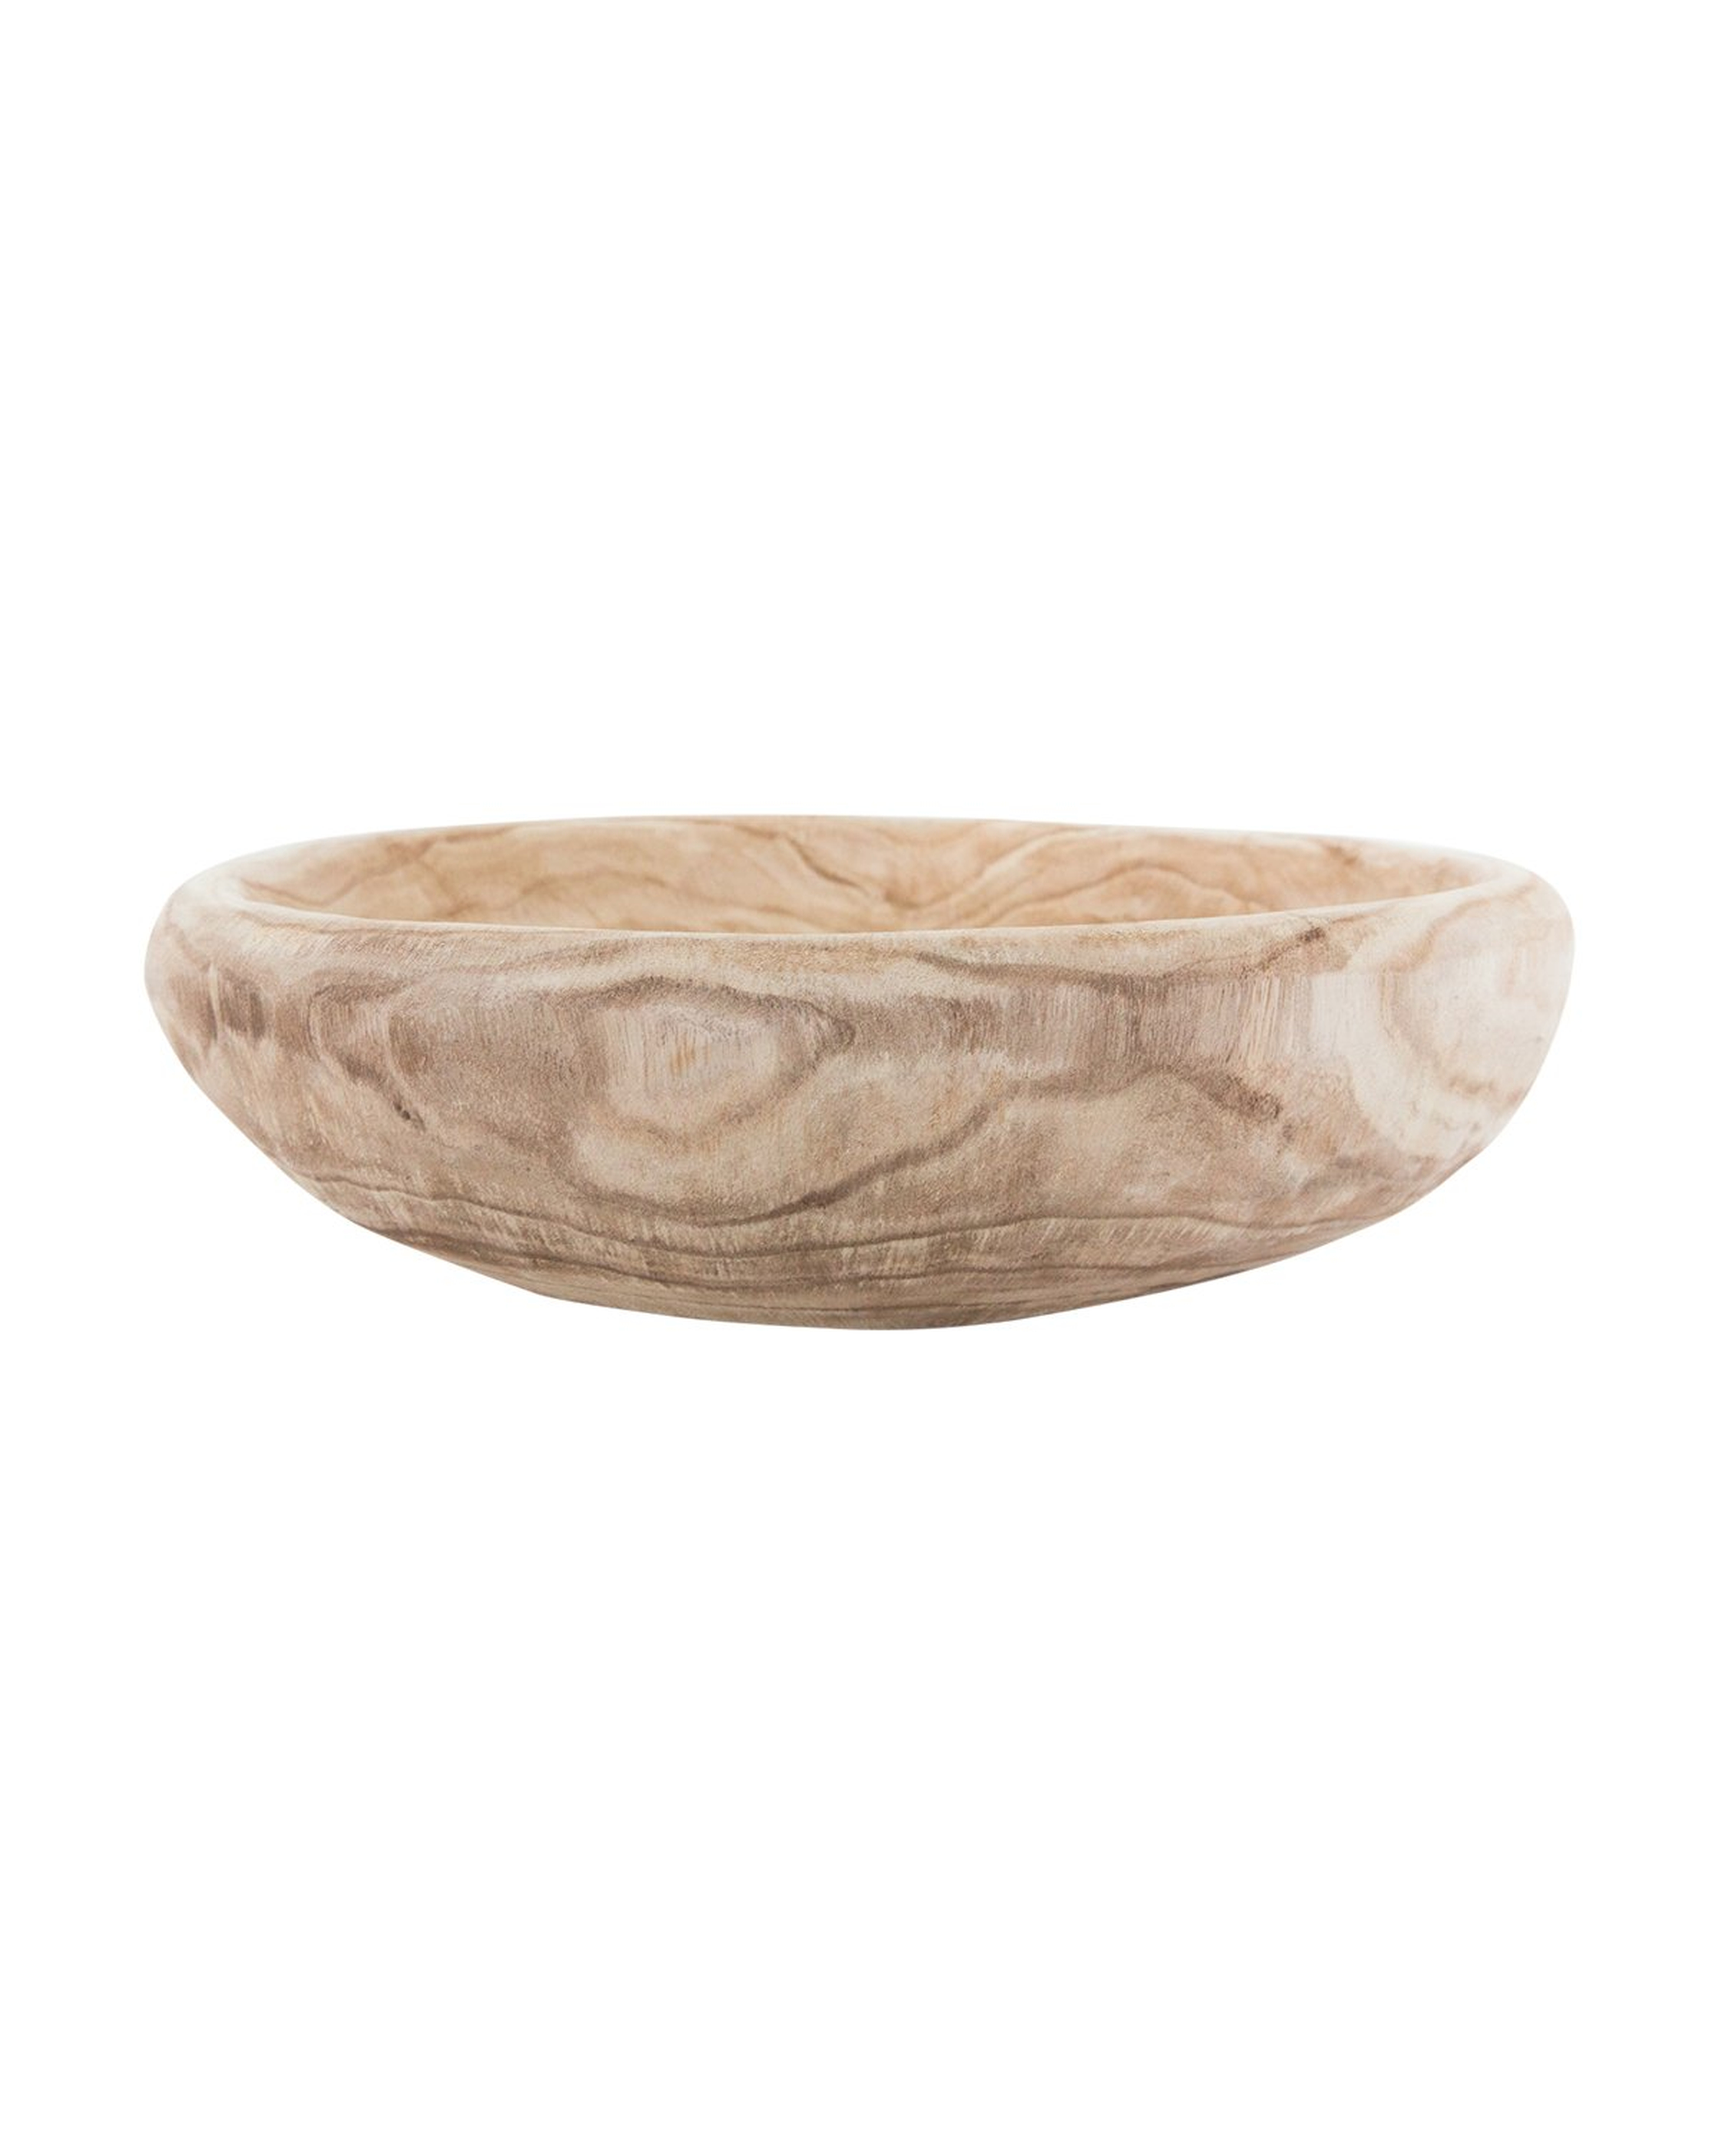 SIMPLY SMOOTH WOODEN BOWL - McGee & Co.